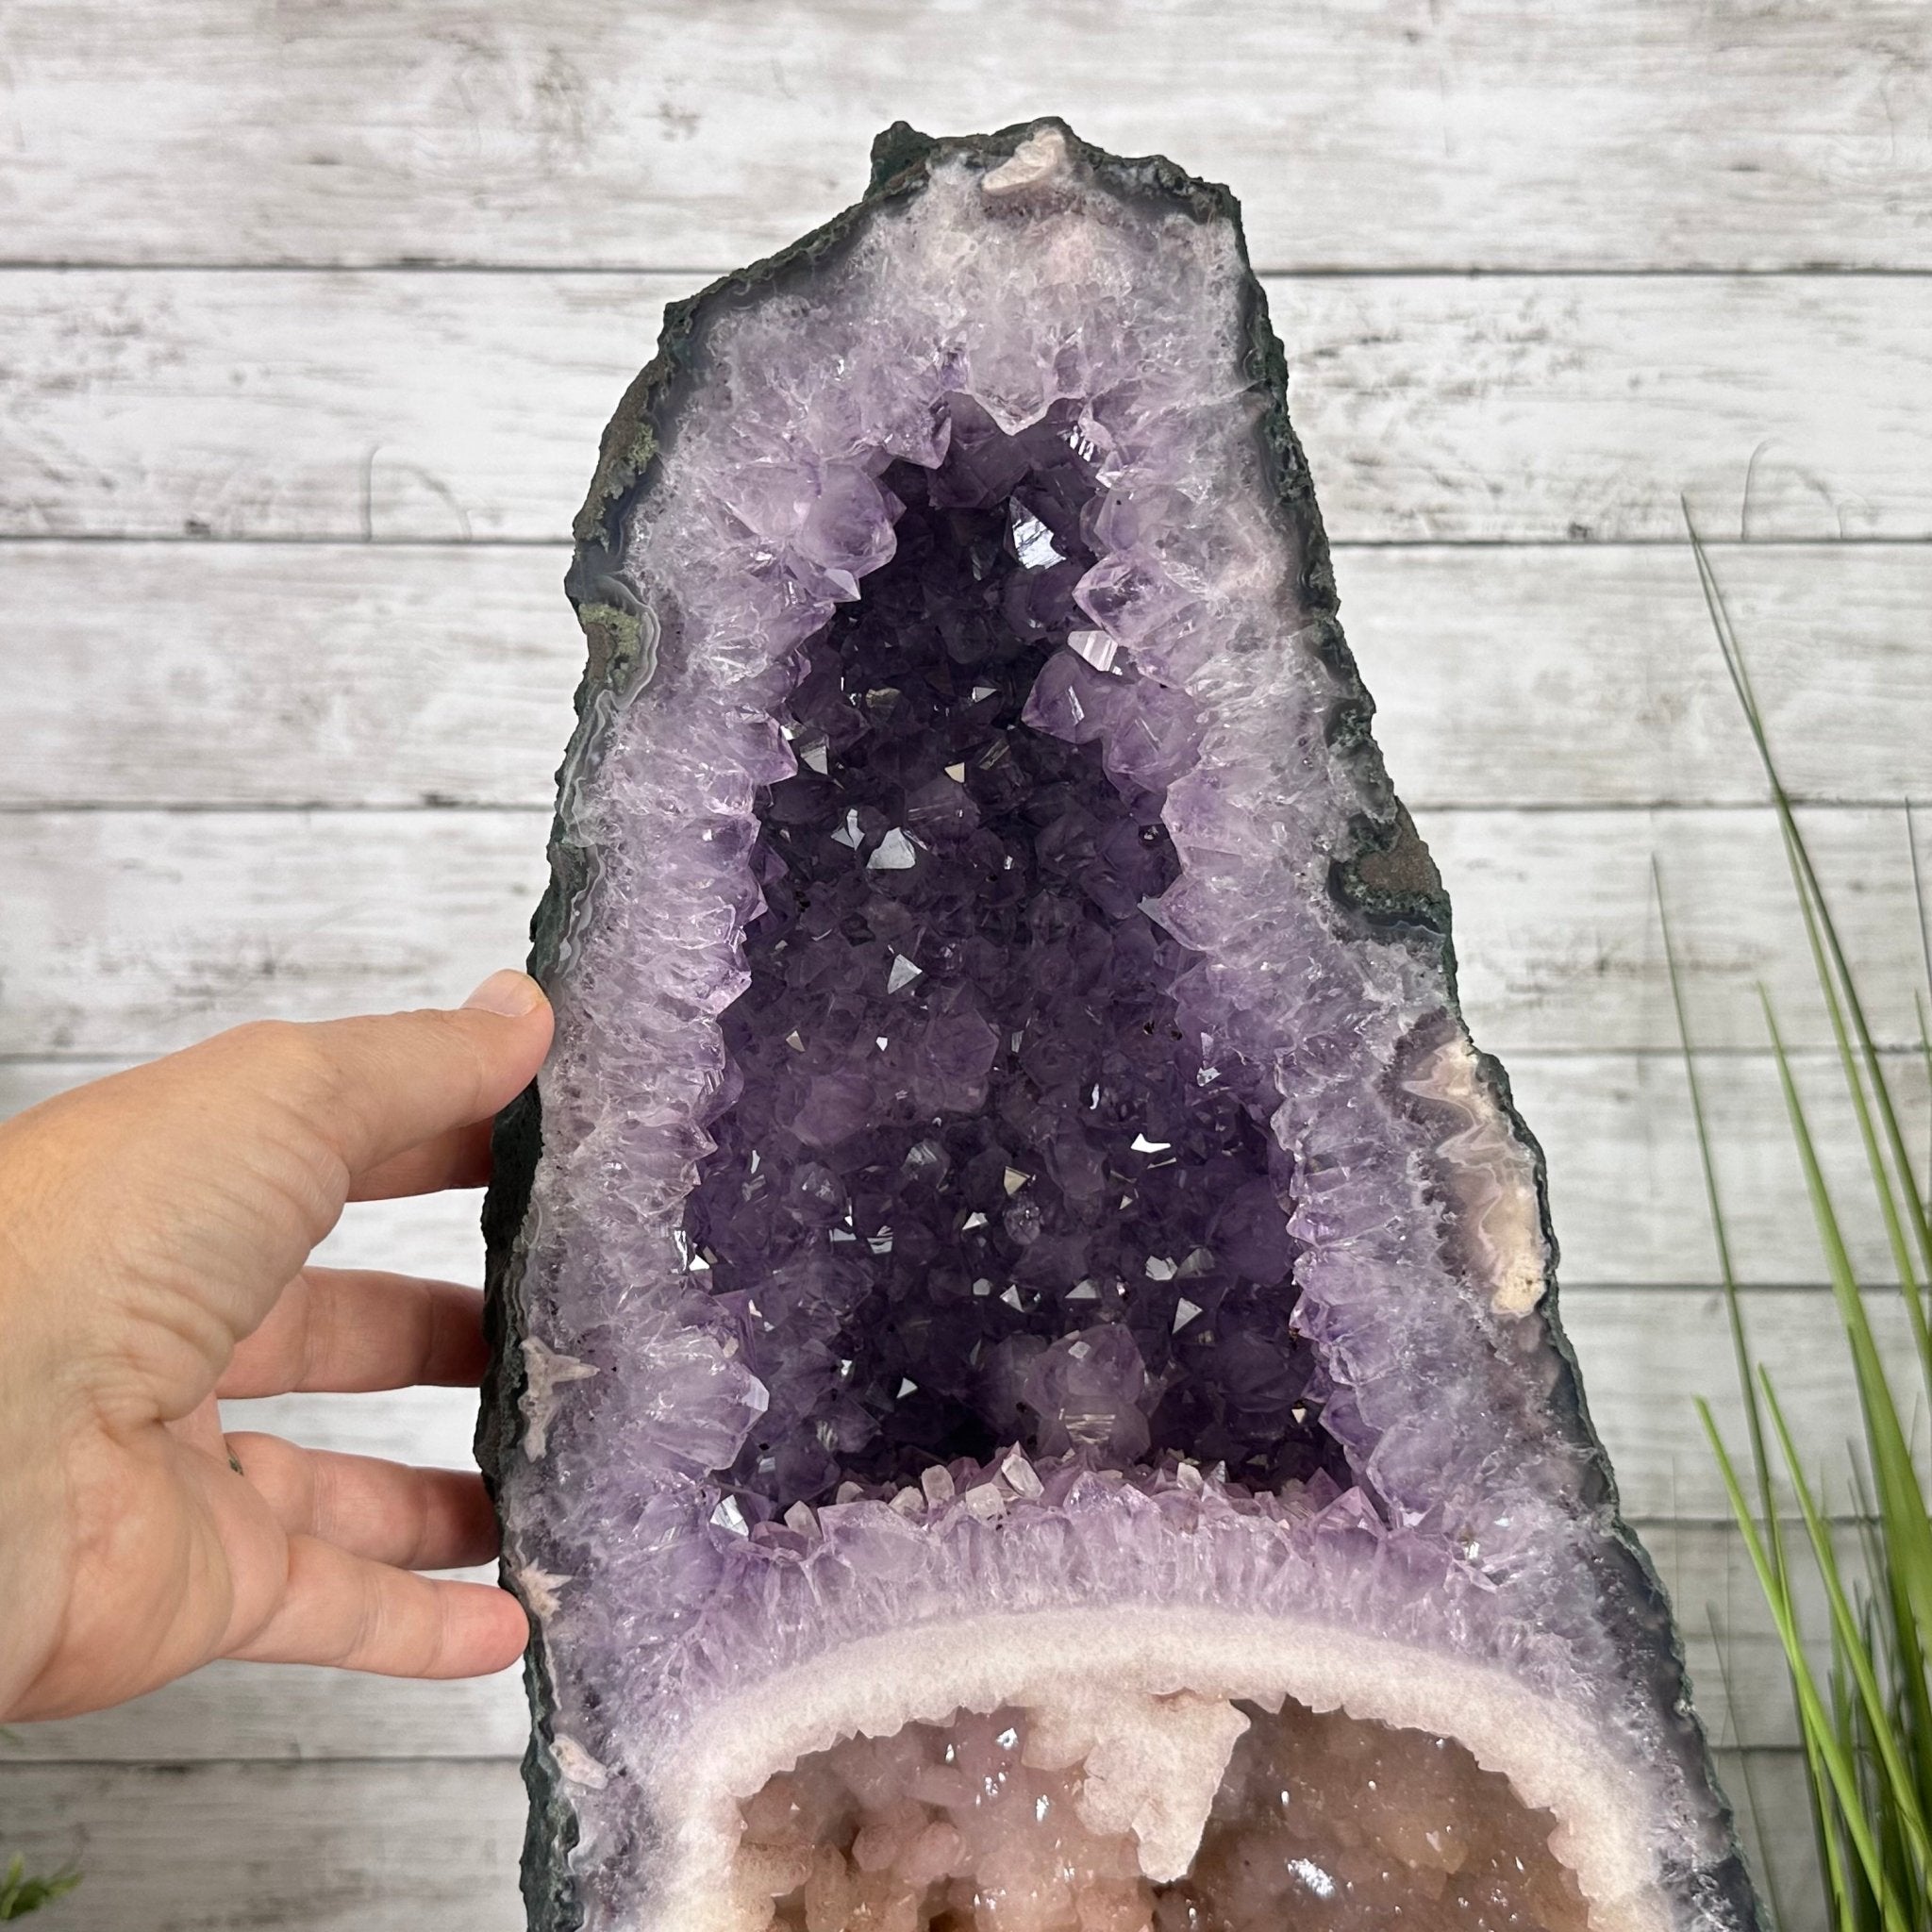 Super Quality Brazilian Amethyst Cathedral, 80.3 lbs & 28.25" Tall, Model #5601-1264 by Brazil Gems - Brazil GemsBrazil GemsSuper Quality Brazilian Amethyst Cathedral, 80.3 lbs & 28.25" Tall, Model #5601-1264 by Brazil GemsCathedrals5601-1264